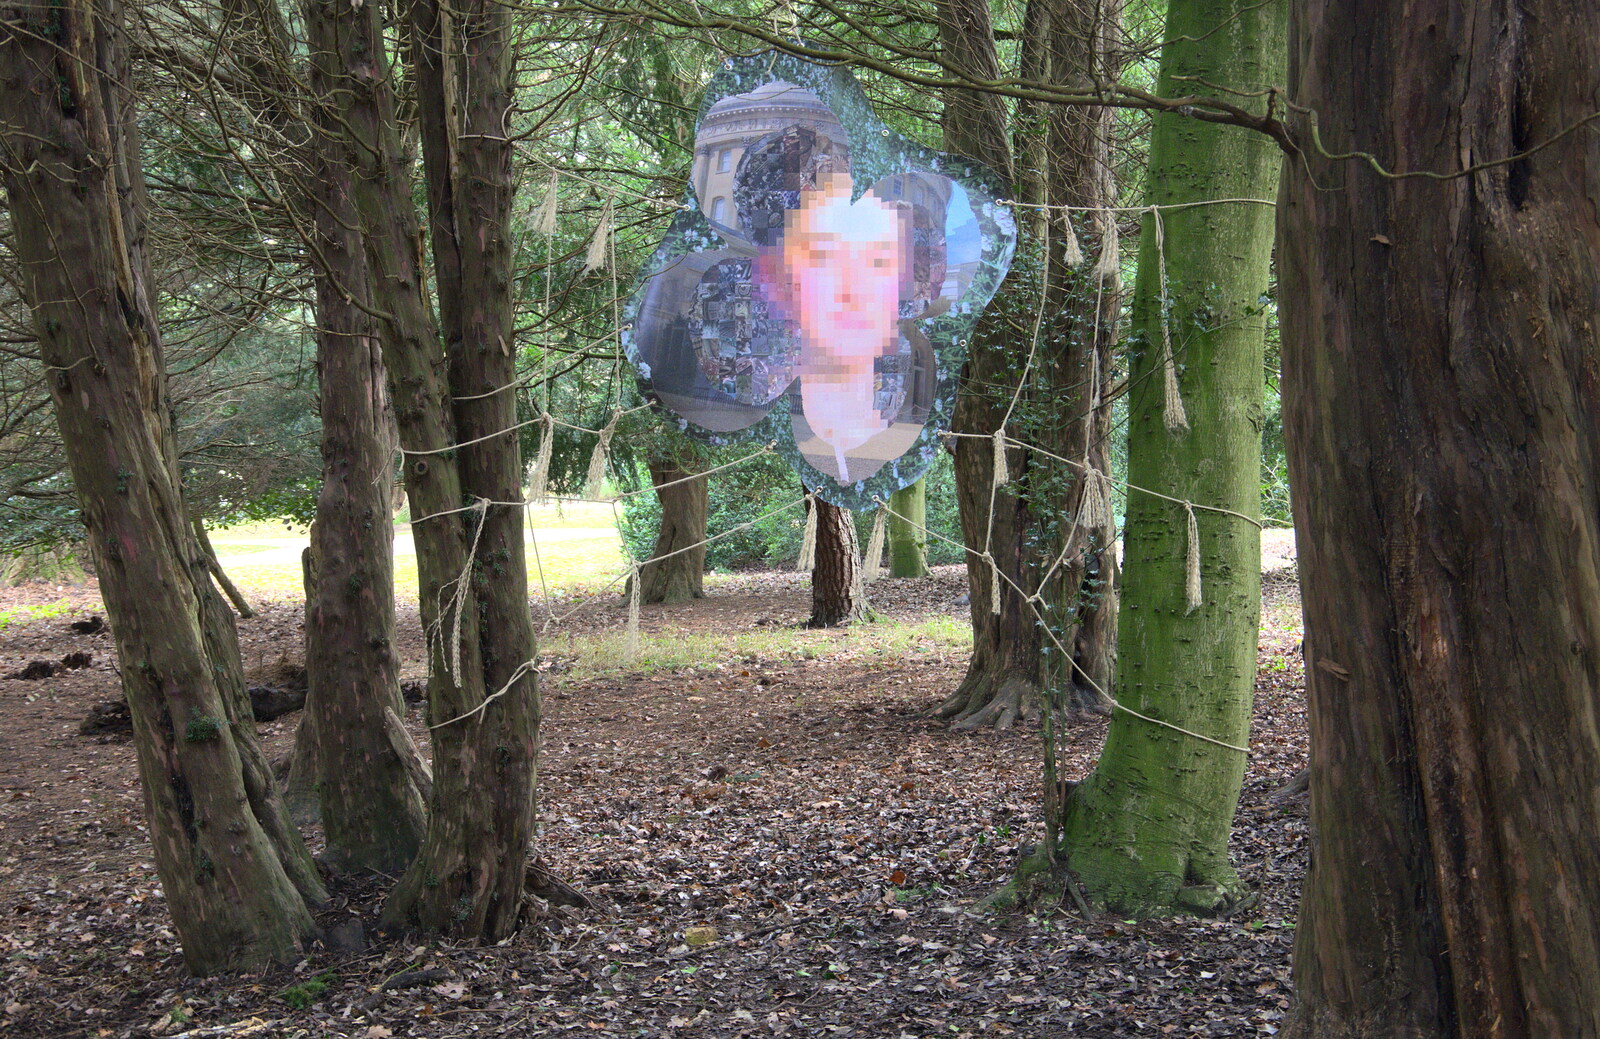 A photo of pixels in the woods from Ickworth House, Horringer, Suffolk - 29th December 2018